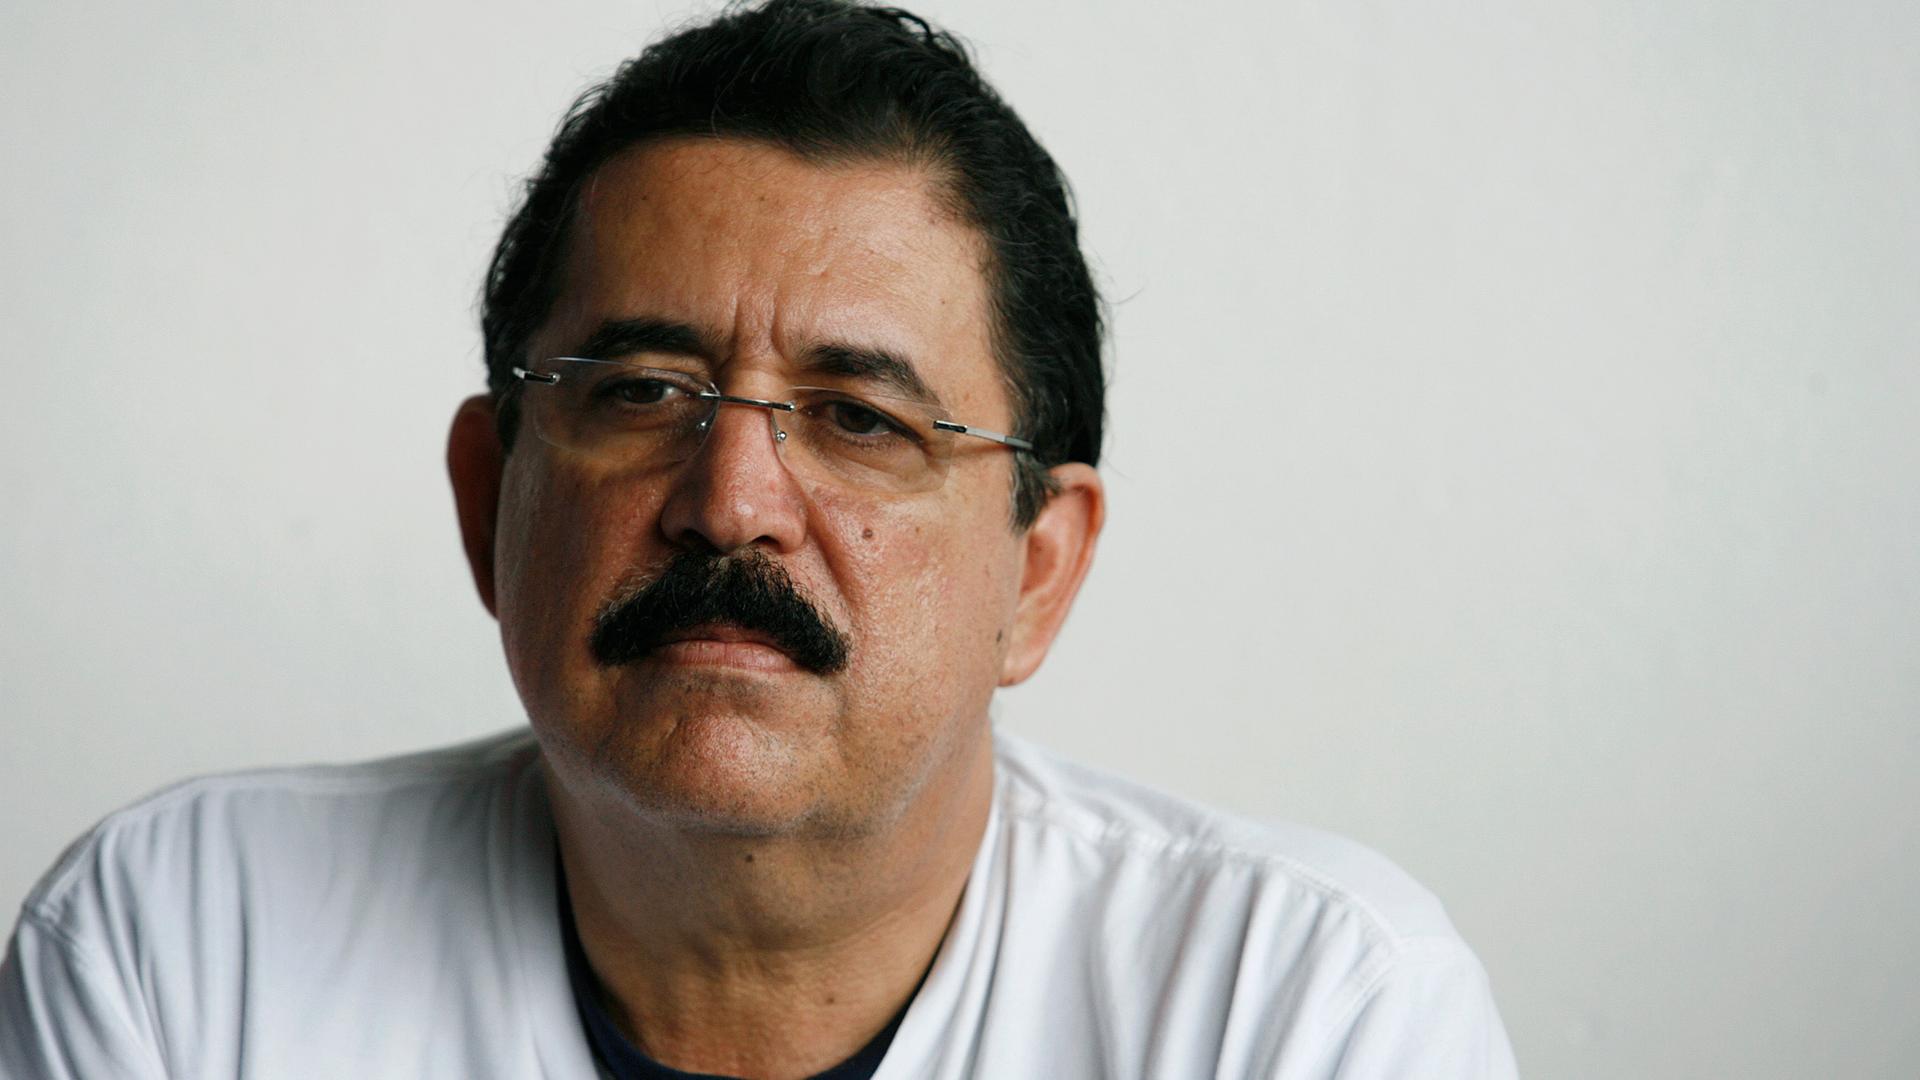 Honduras' ousted President Manuel Zelaya attends a news conference at Juan Santamaria airport in Alajuela, Costa Rica on June 28, 2009.